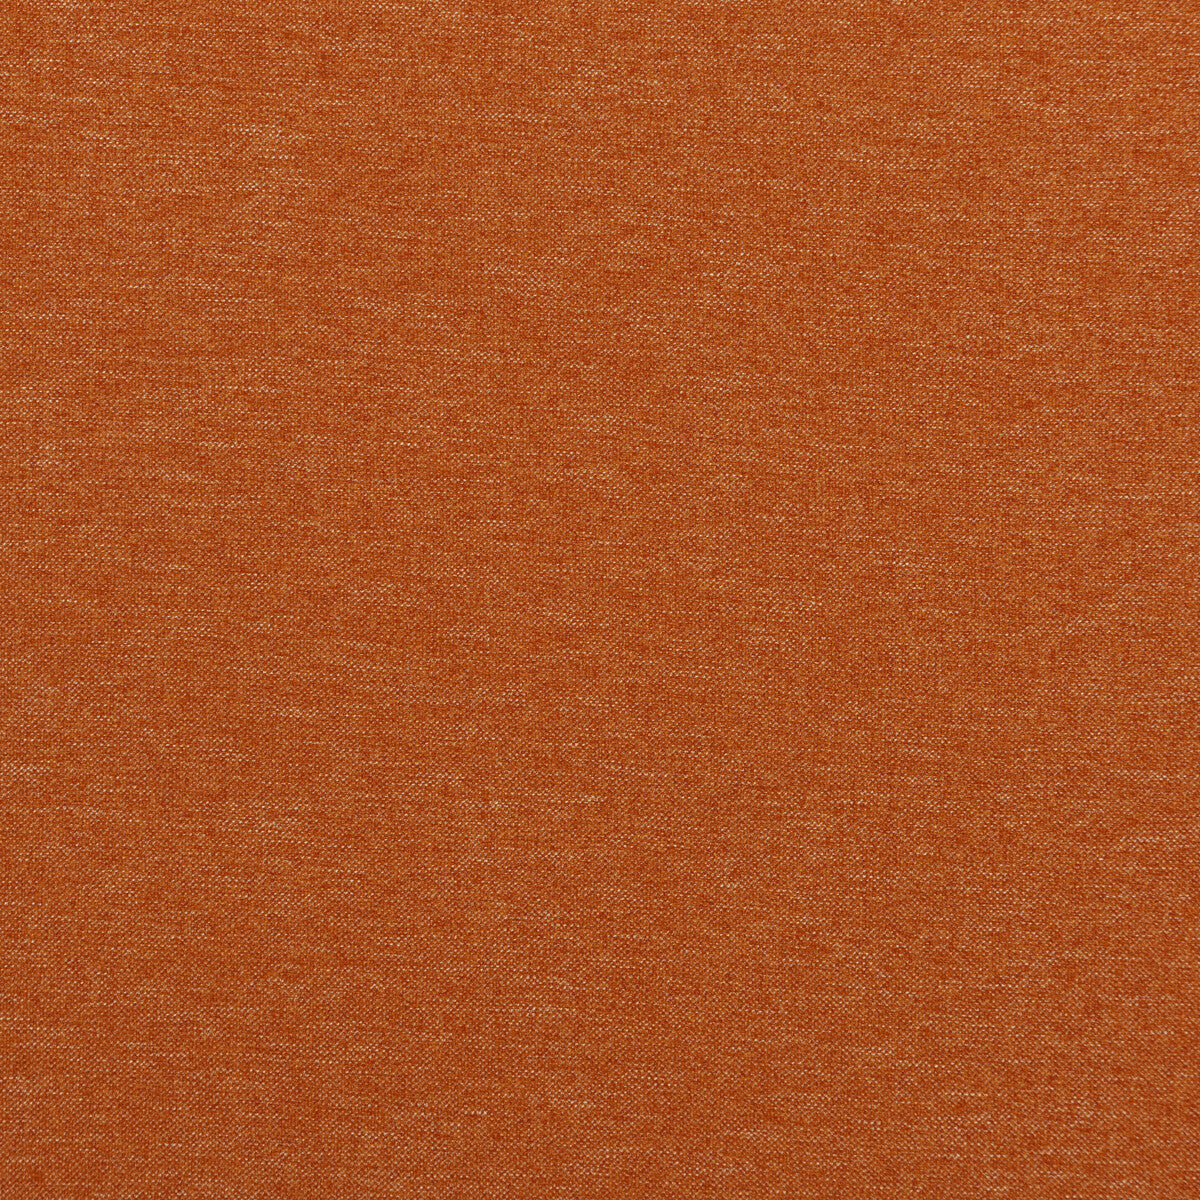 Melbury fabric in spice color - pattern PF50440.330.0 - by Baker Lifestyle in the Carnival collection